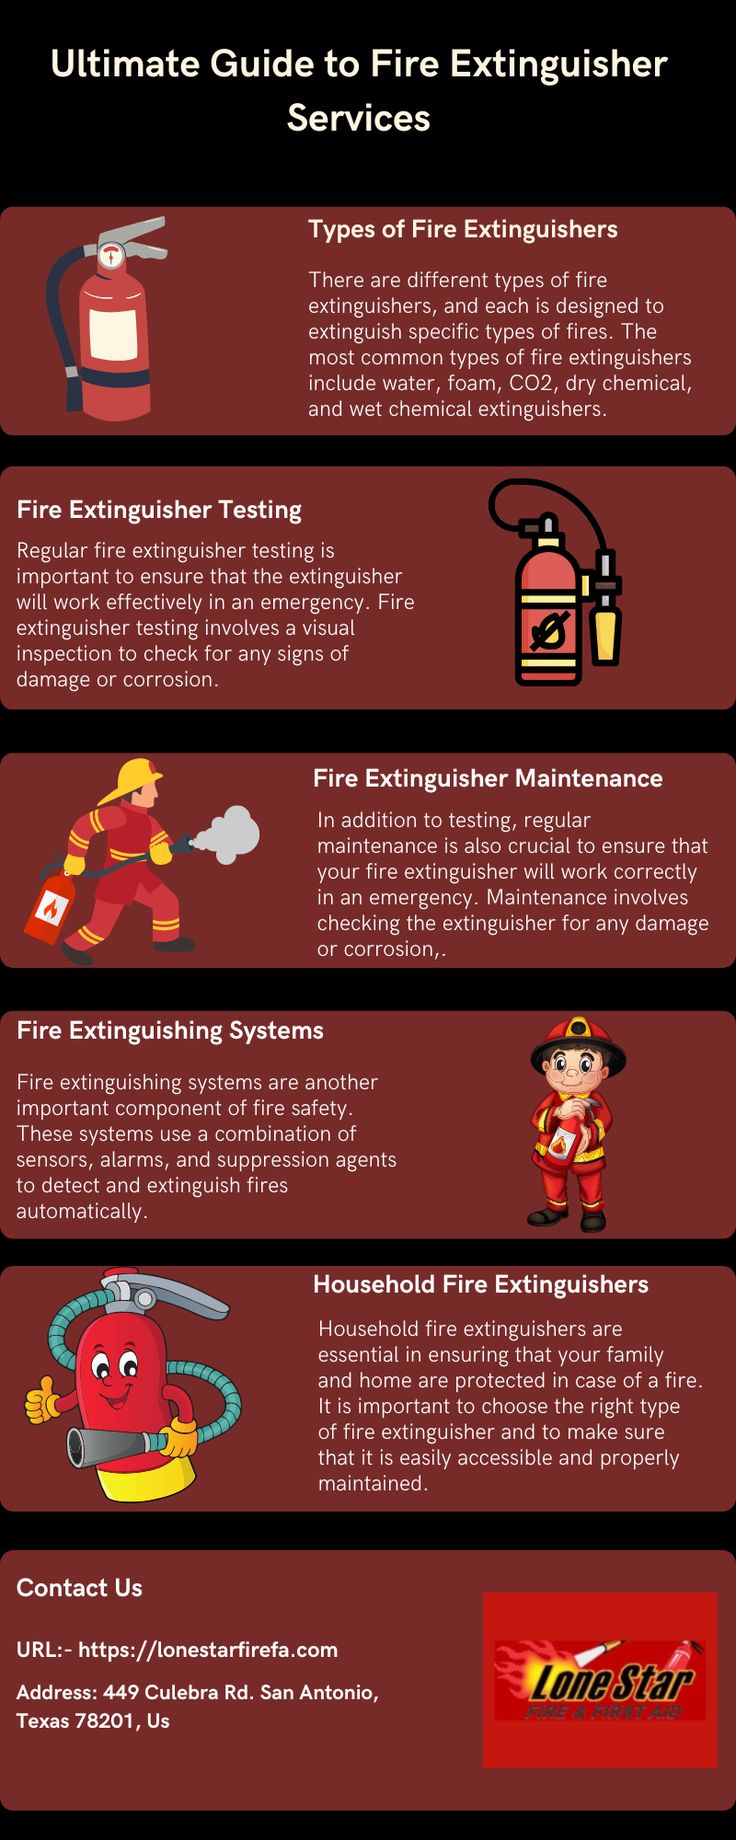 Ultimate Guide to Fire Extinguisher Services